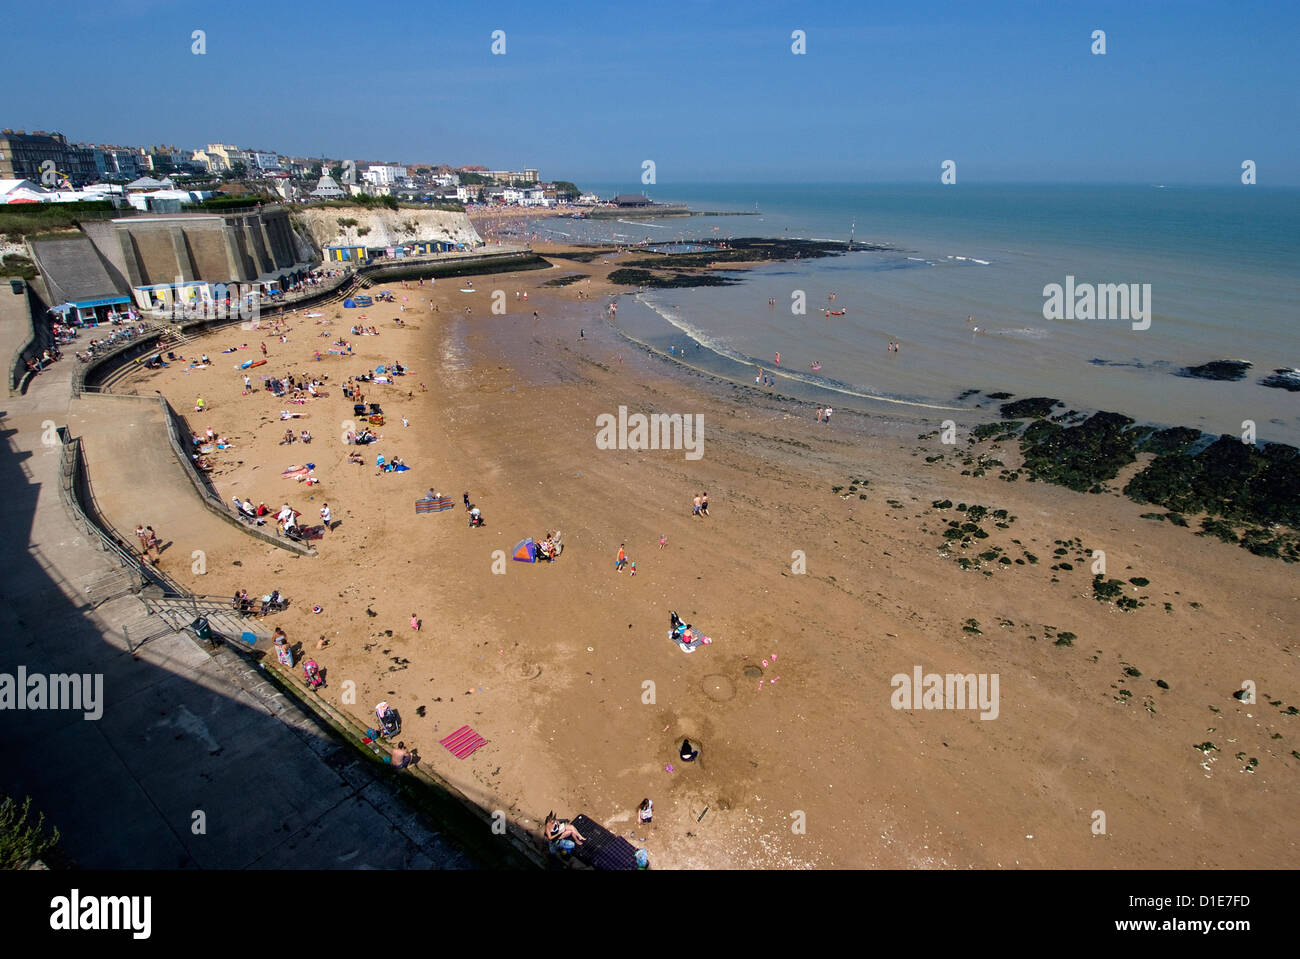 Plage, Louisa Bay, Broadstairs, Kent, Angleterre, Royaume-Uni, Europe Banque D'Images